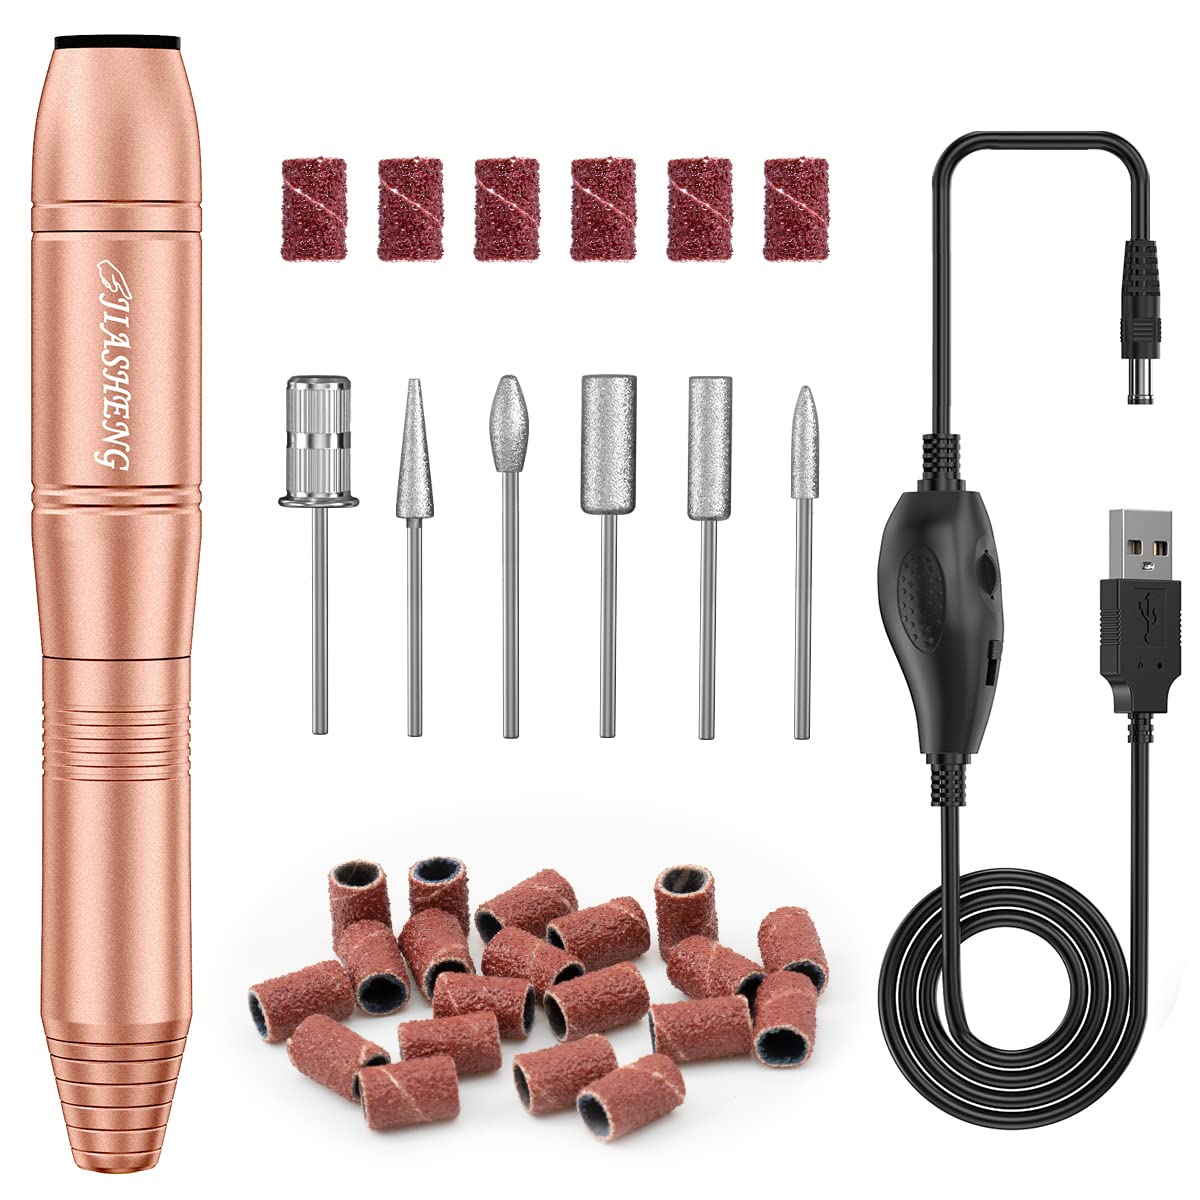 Electric Nail File, USB Nail Drill 20000rpm Electric Nail Drill for Manicure and Pedicure, Professional Electric Nail Files Kit for Acrylic Gel Nails, Gold